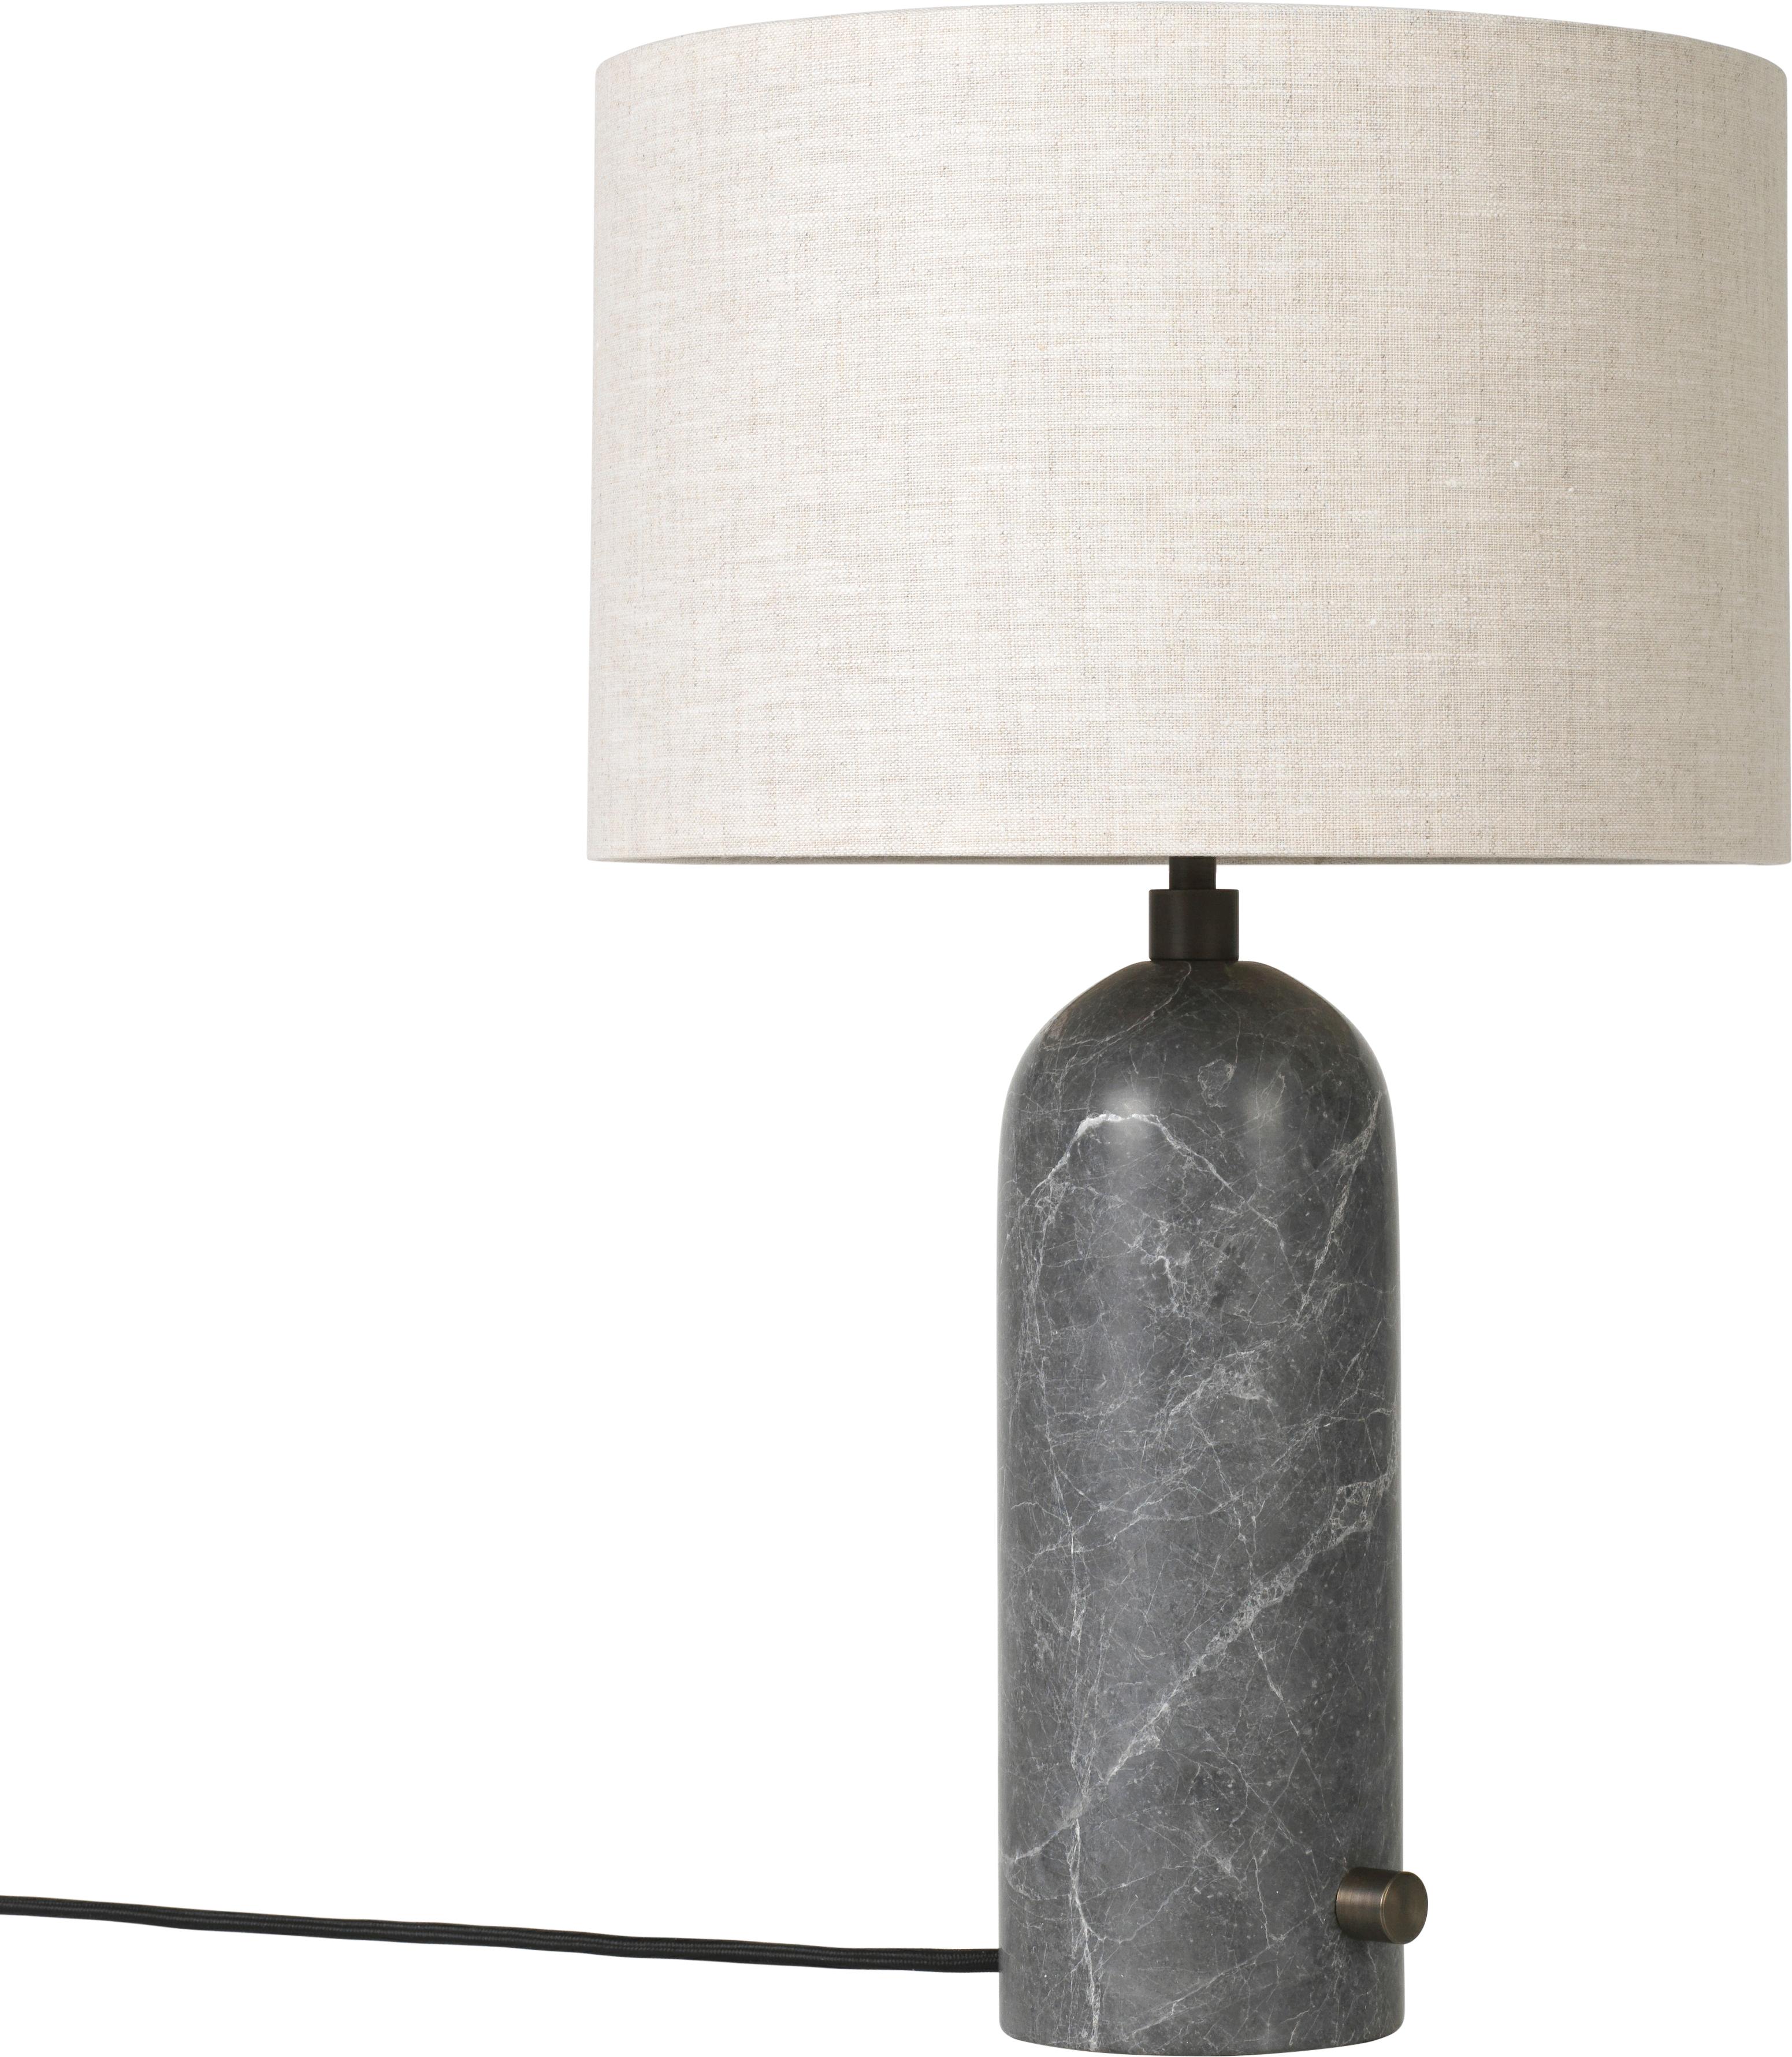 Large 'Gravity' Marble Table Lamp by Space Copenhagen for Gubi in White For Sale 4